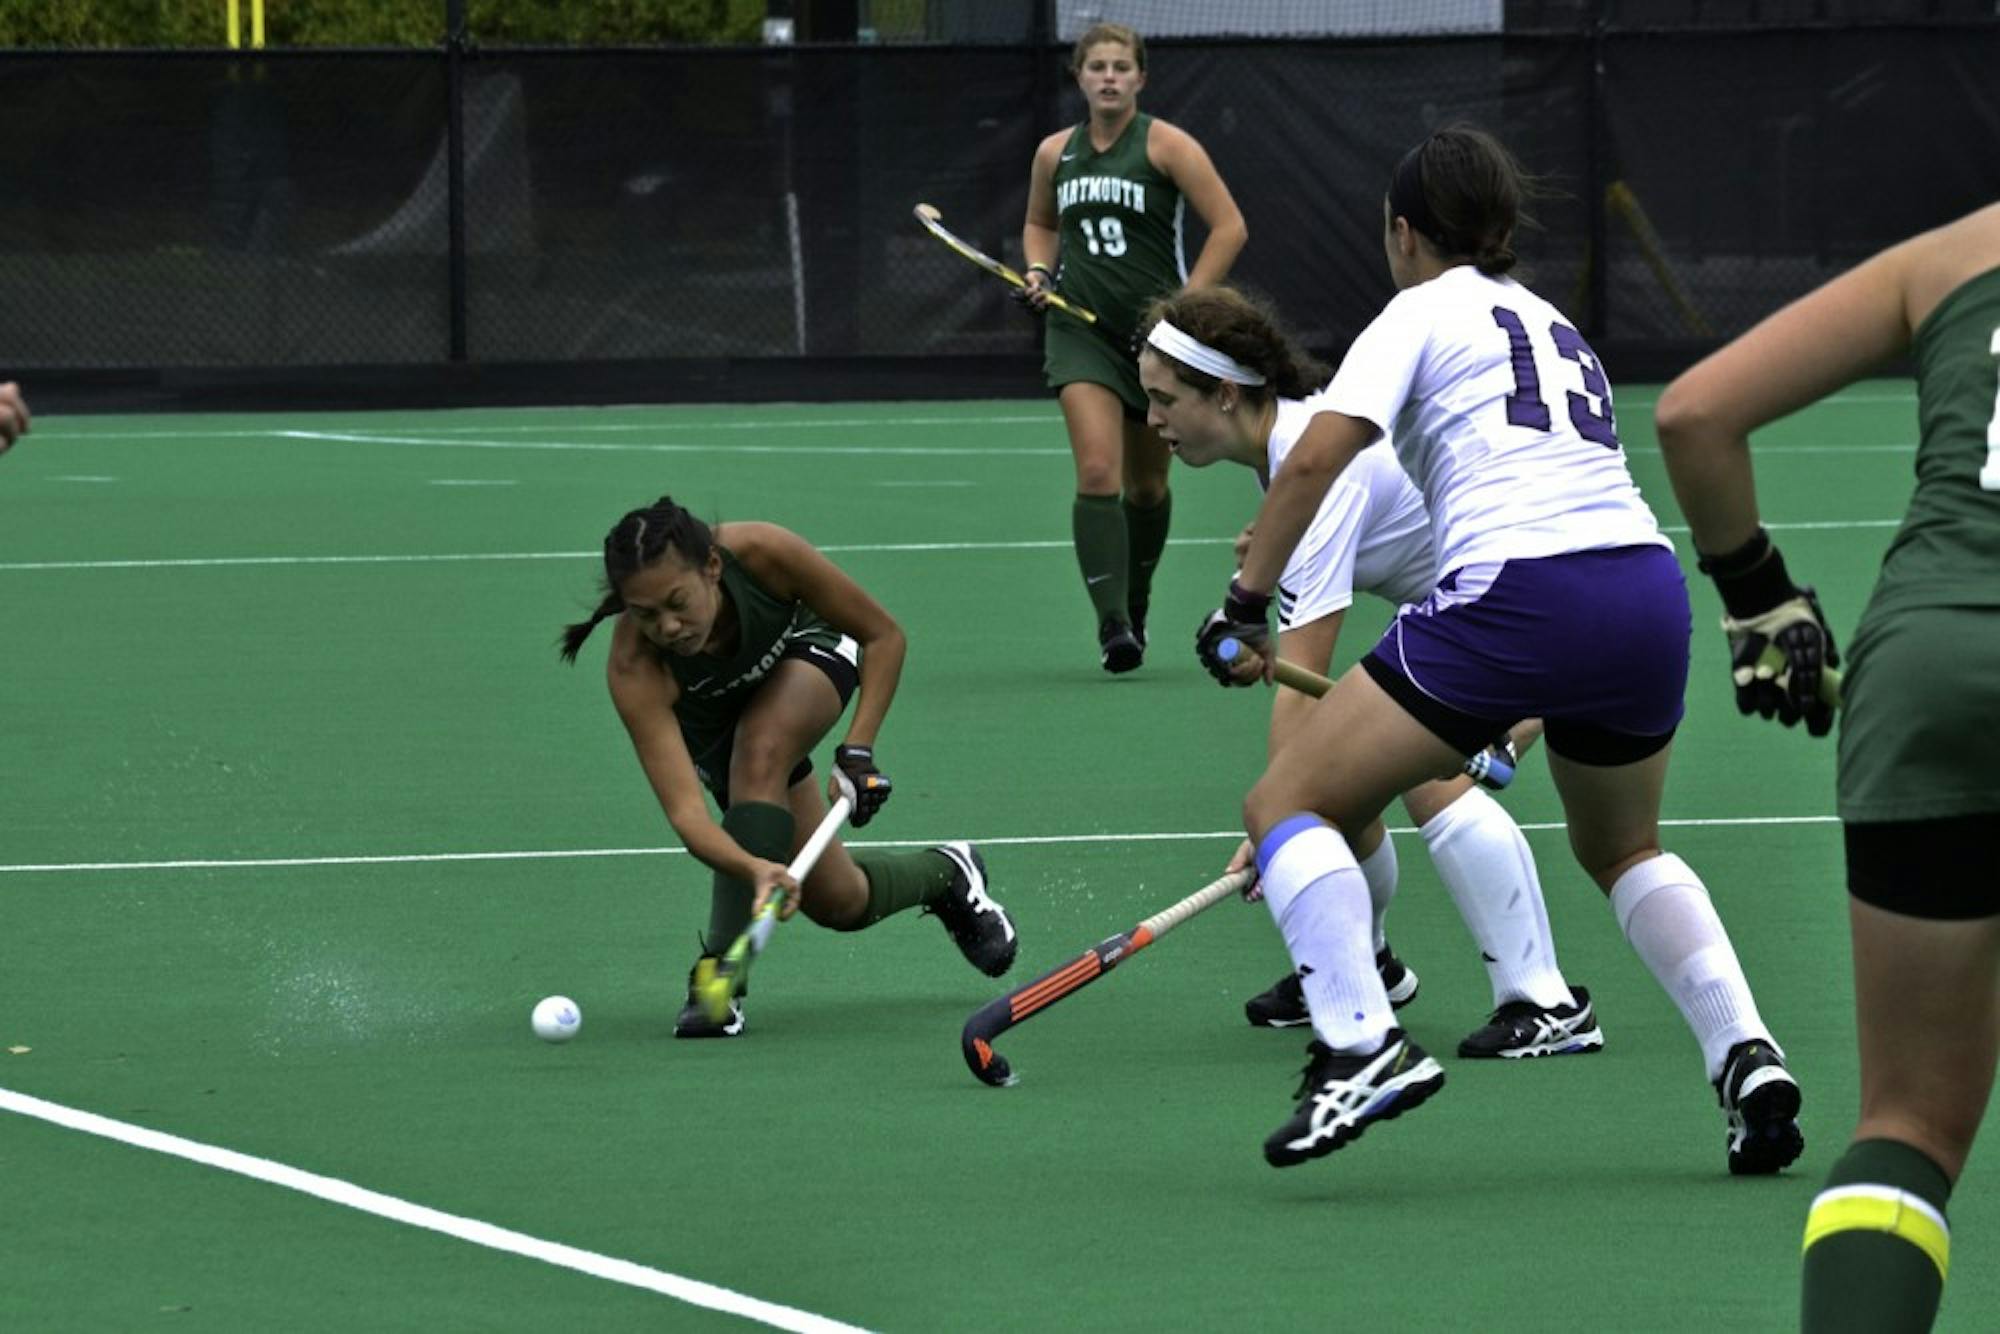 A last-second goal forced overtime, which Ali Savage ’15 ended with her eighth goal this year.